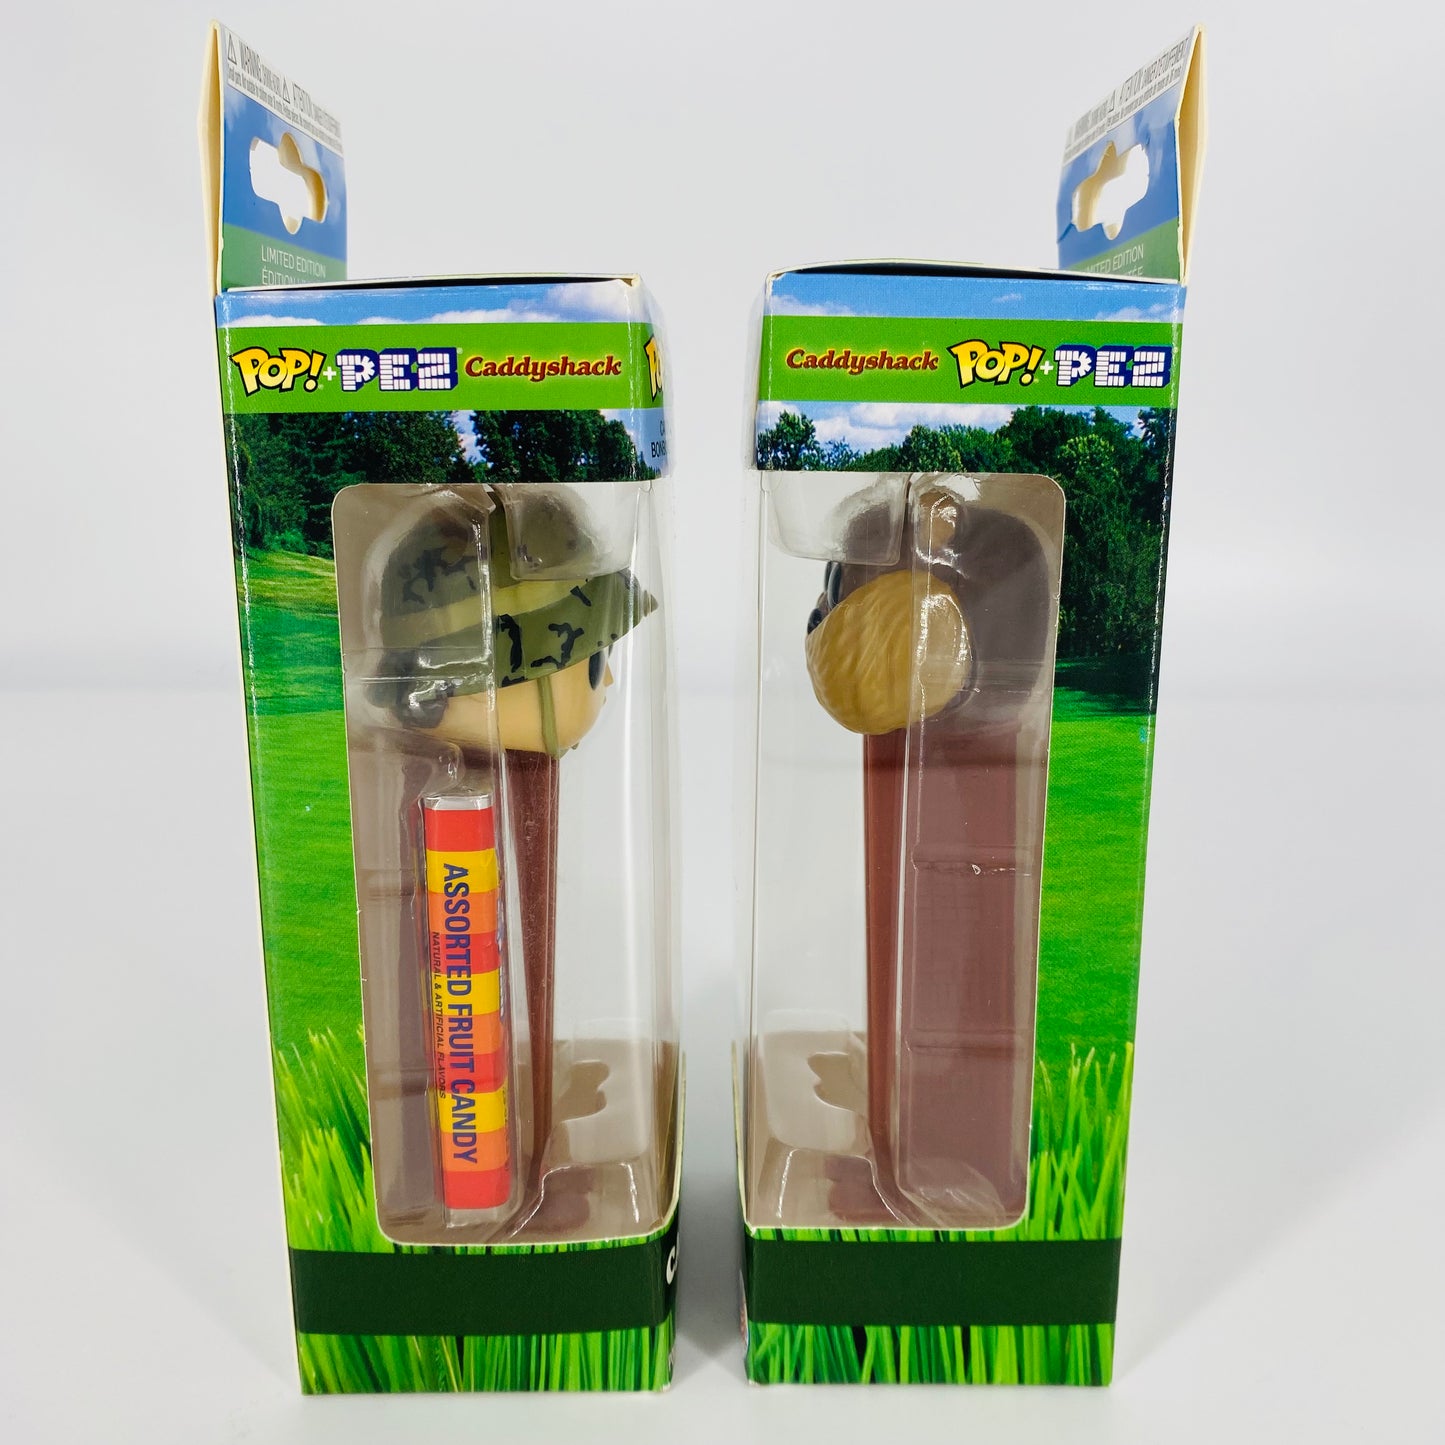 Caddyshack Carl Spackler and Gopher Pop! + PEZ dispensers (2019) boxed